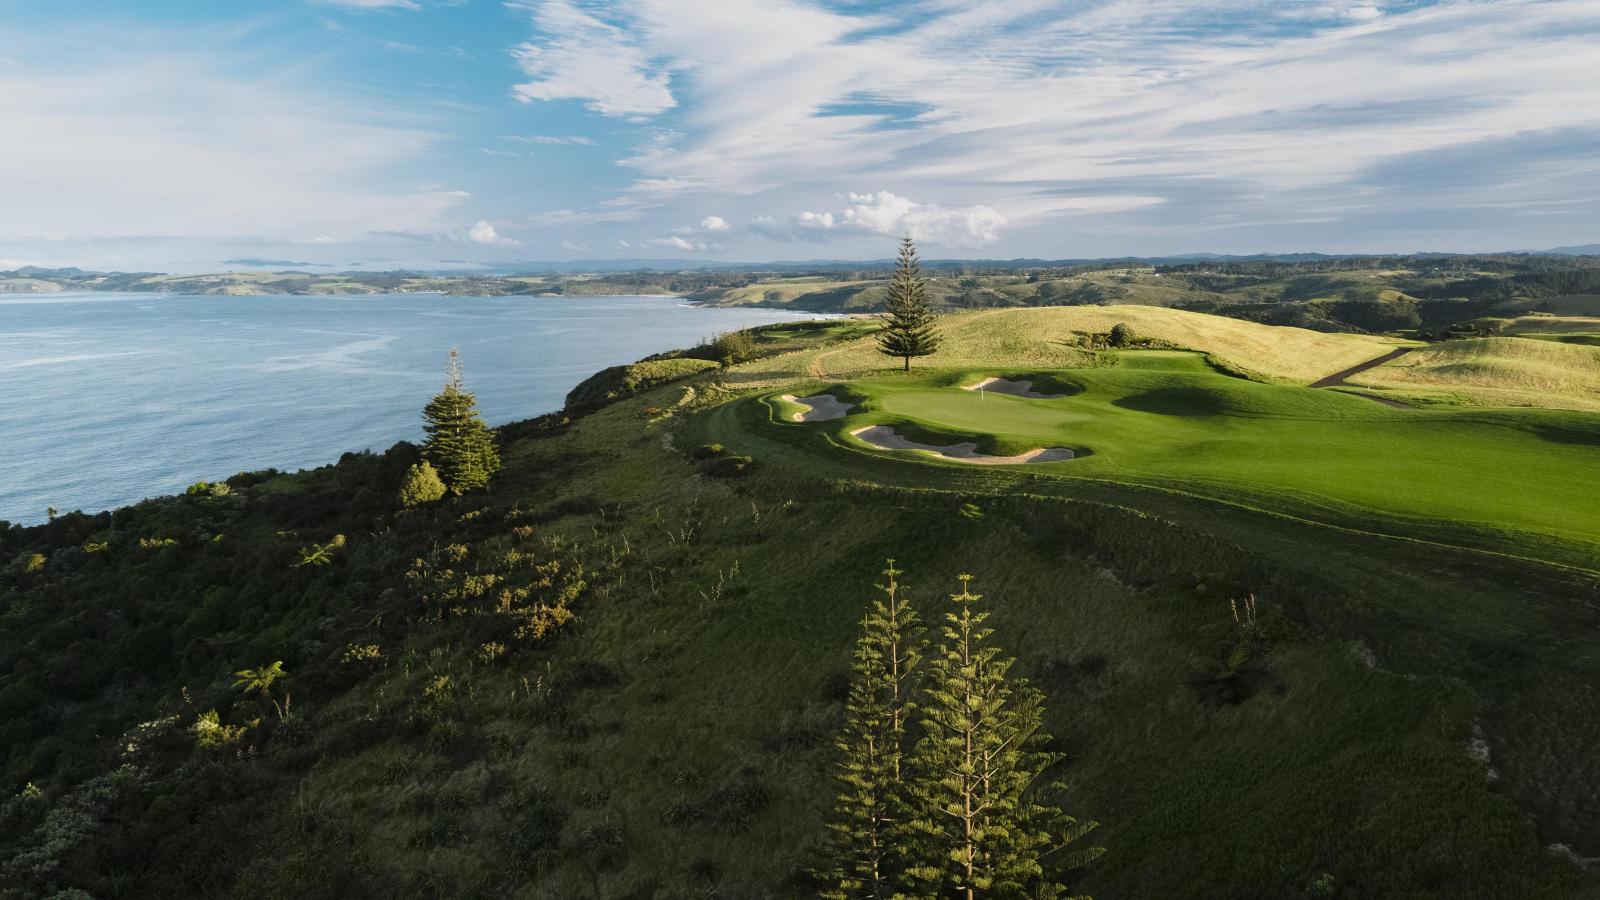 Drone image of the Kauri Cliffs Golf Course in New Zealand's North Islands